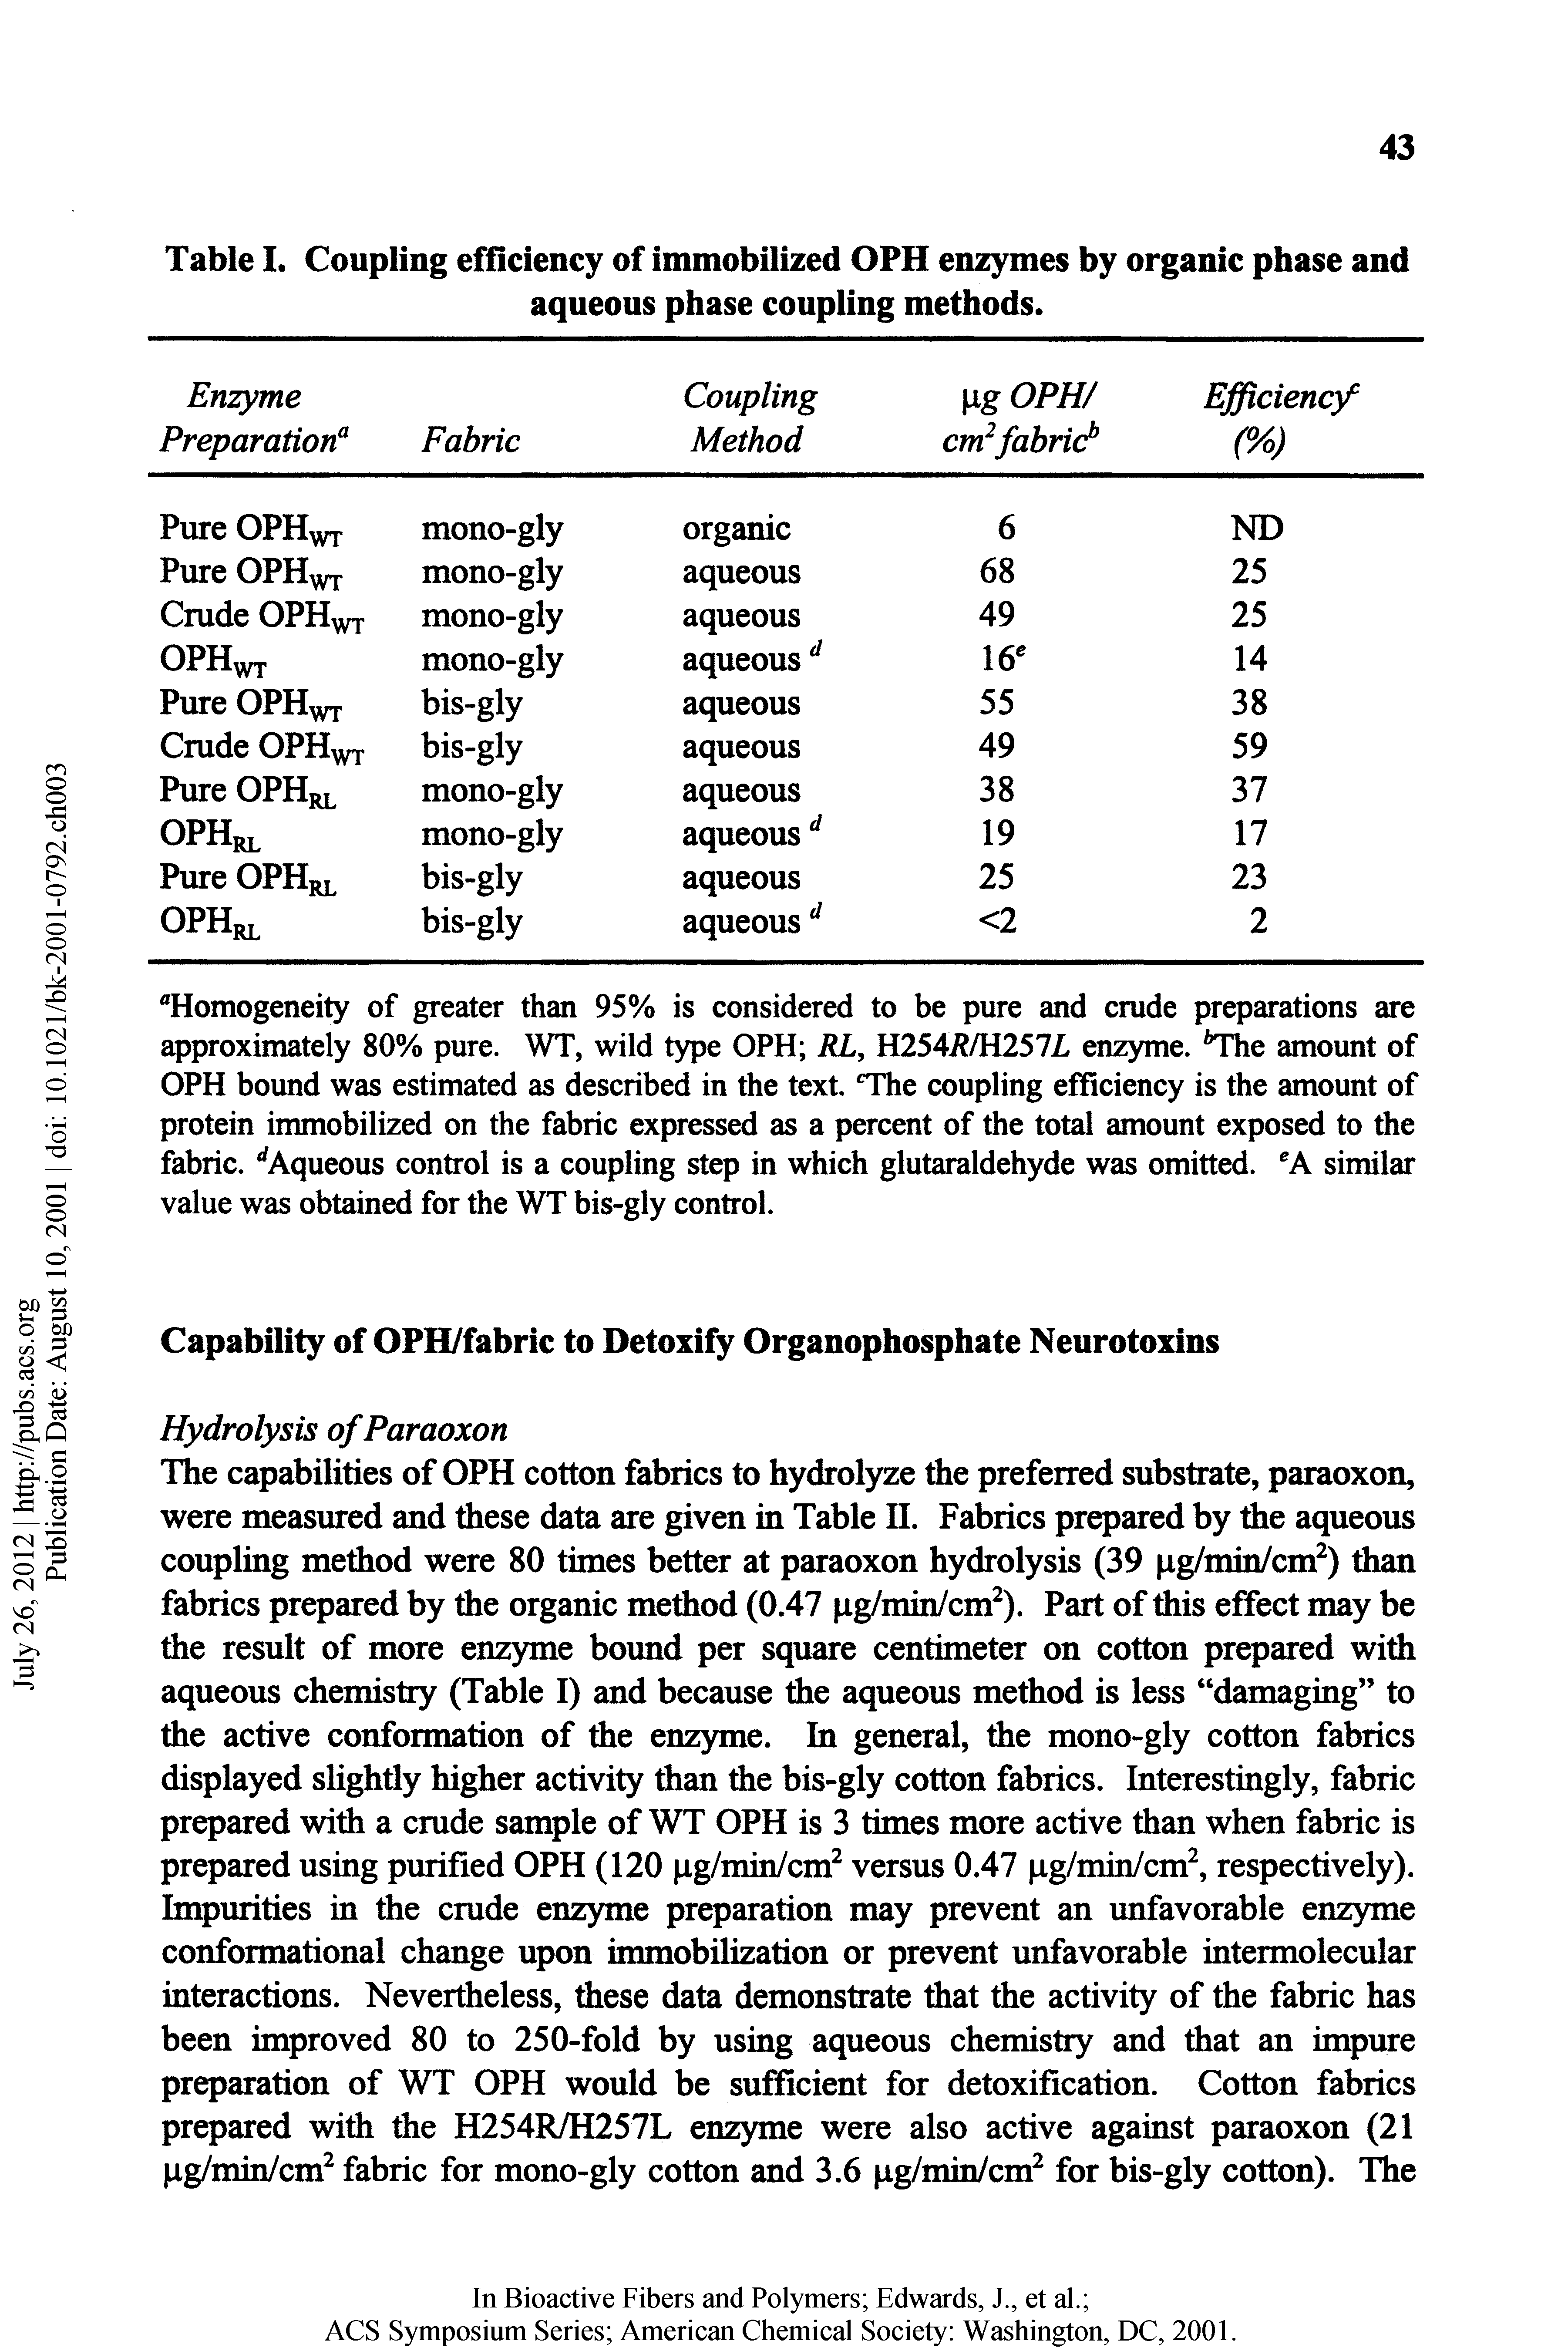 Table I. Coupling efficiency of immobilized OPH enzymes by organic phase and aqueous phase coupling methods.